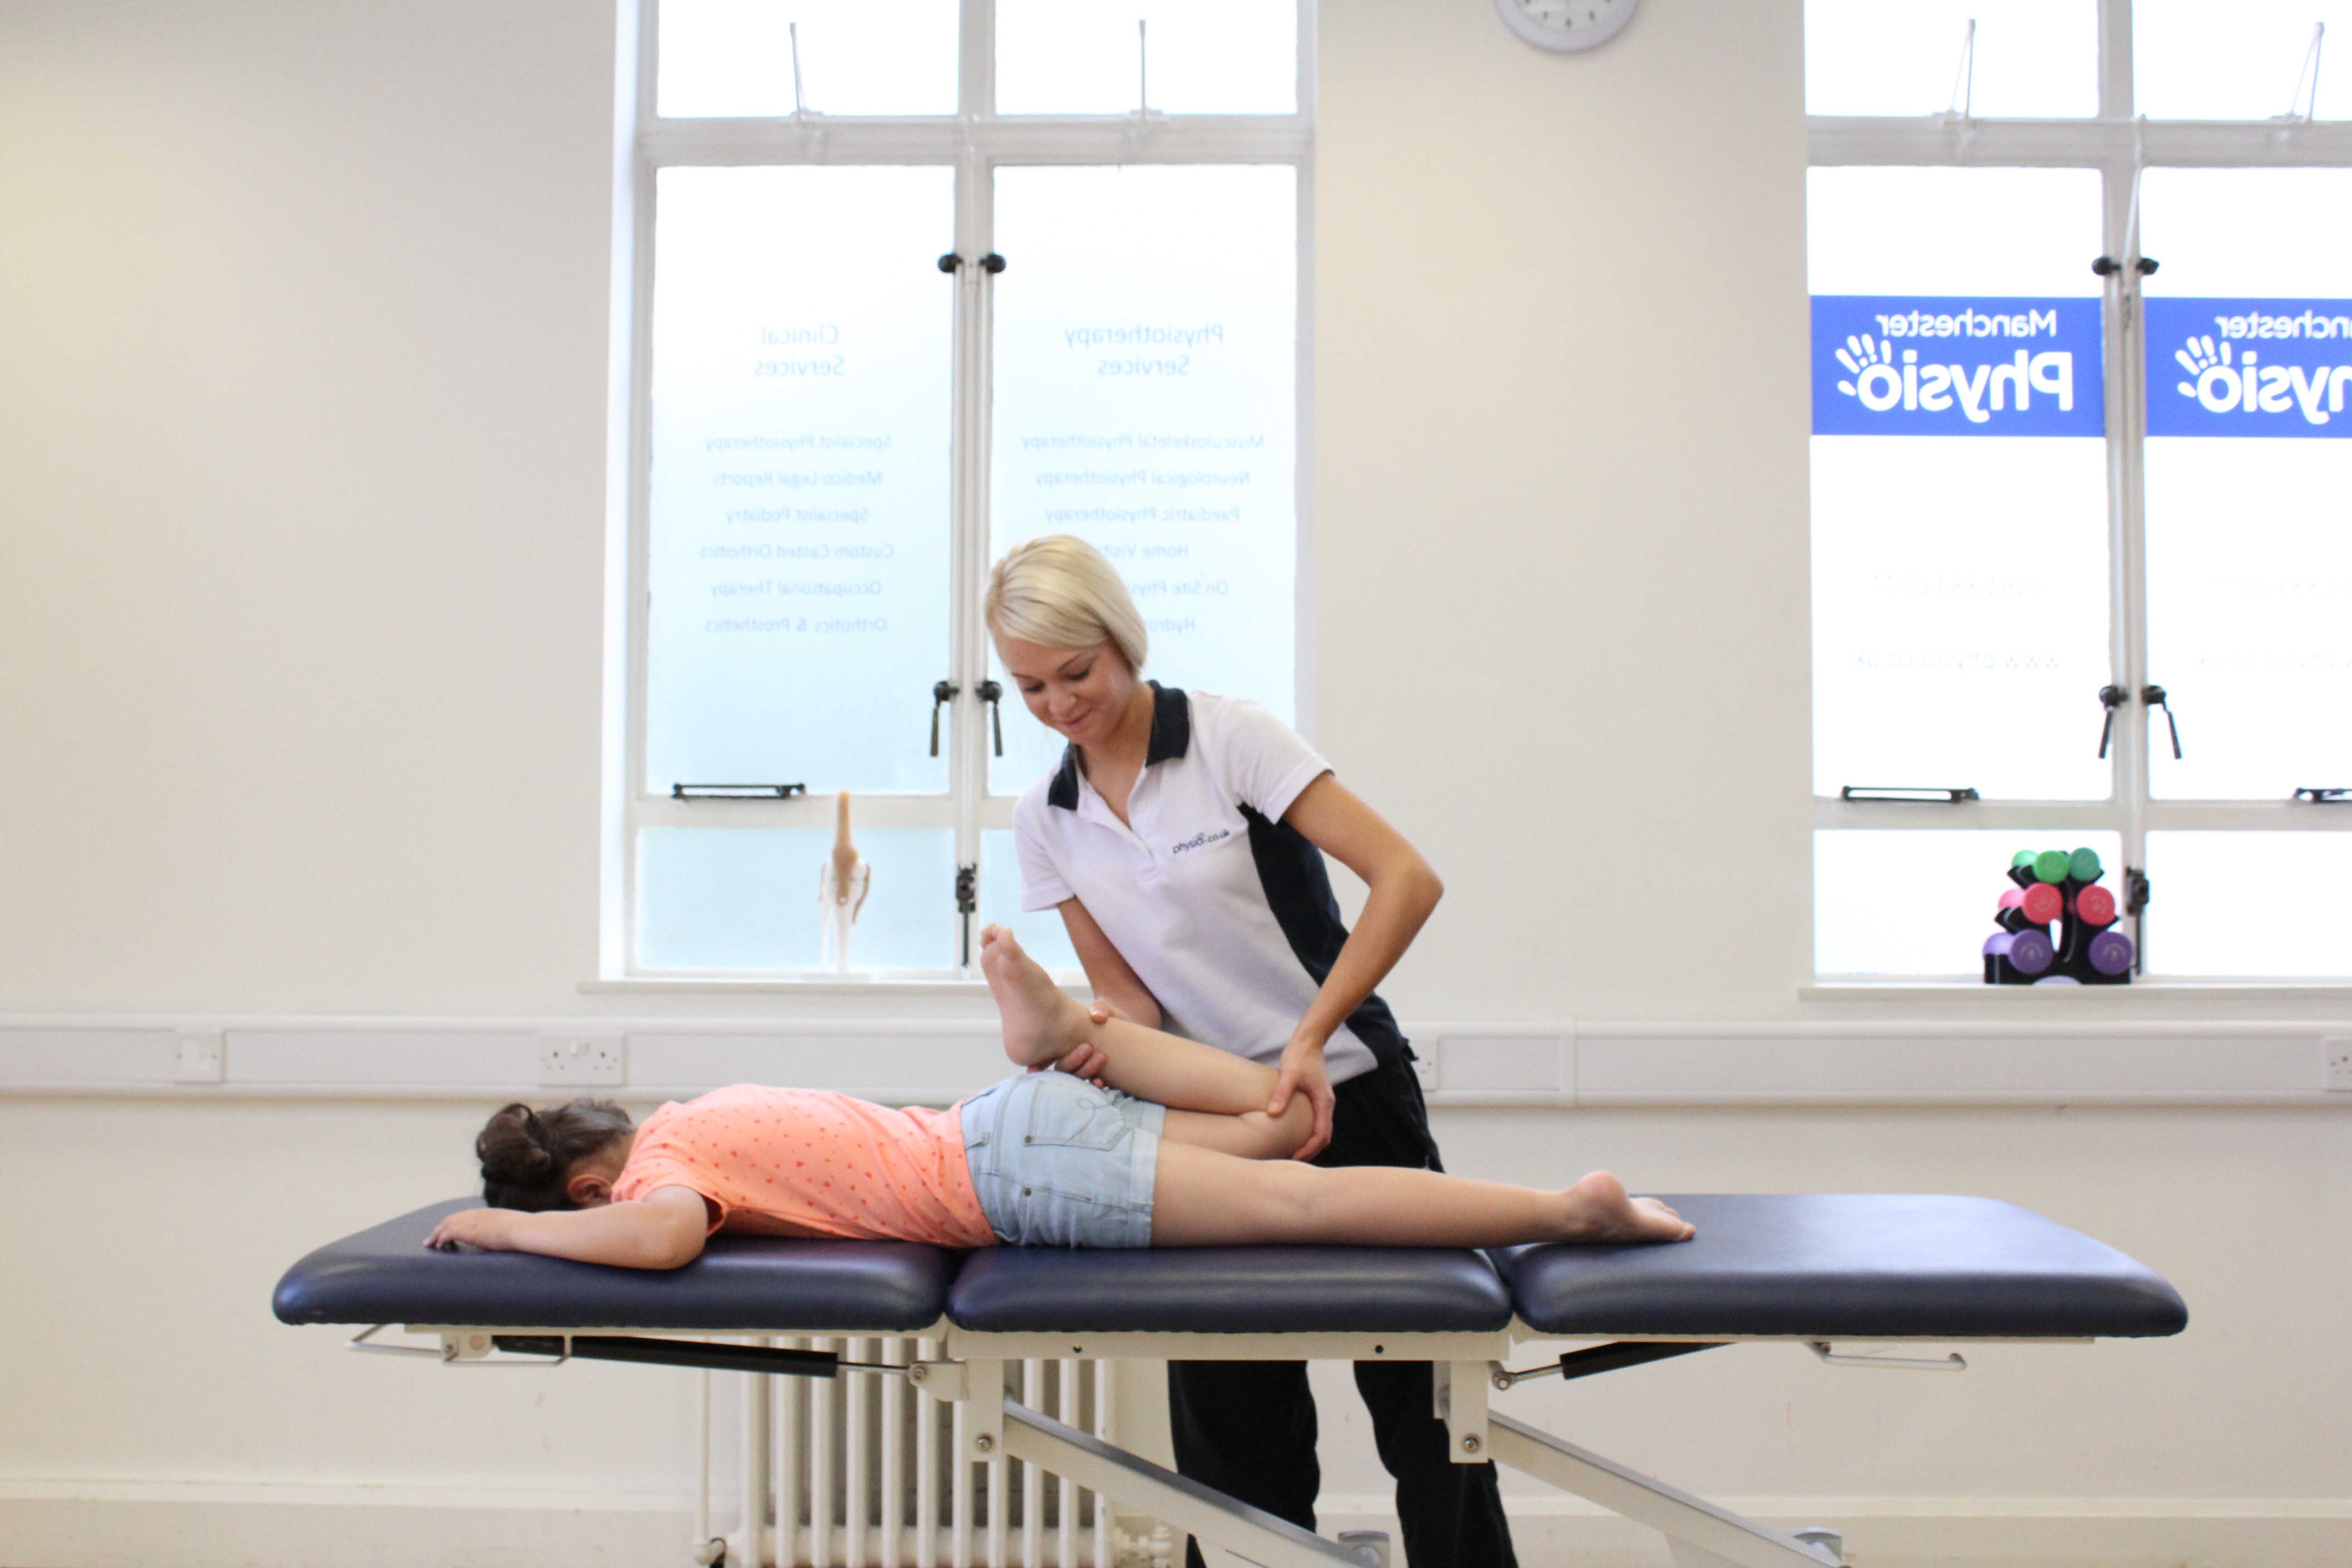 Passive stretches and mobilisations to relieve pain and stiffness